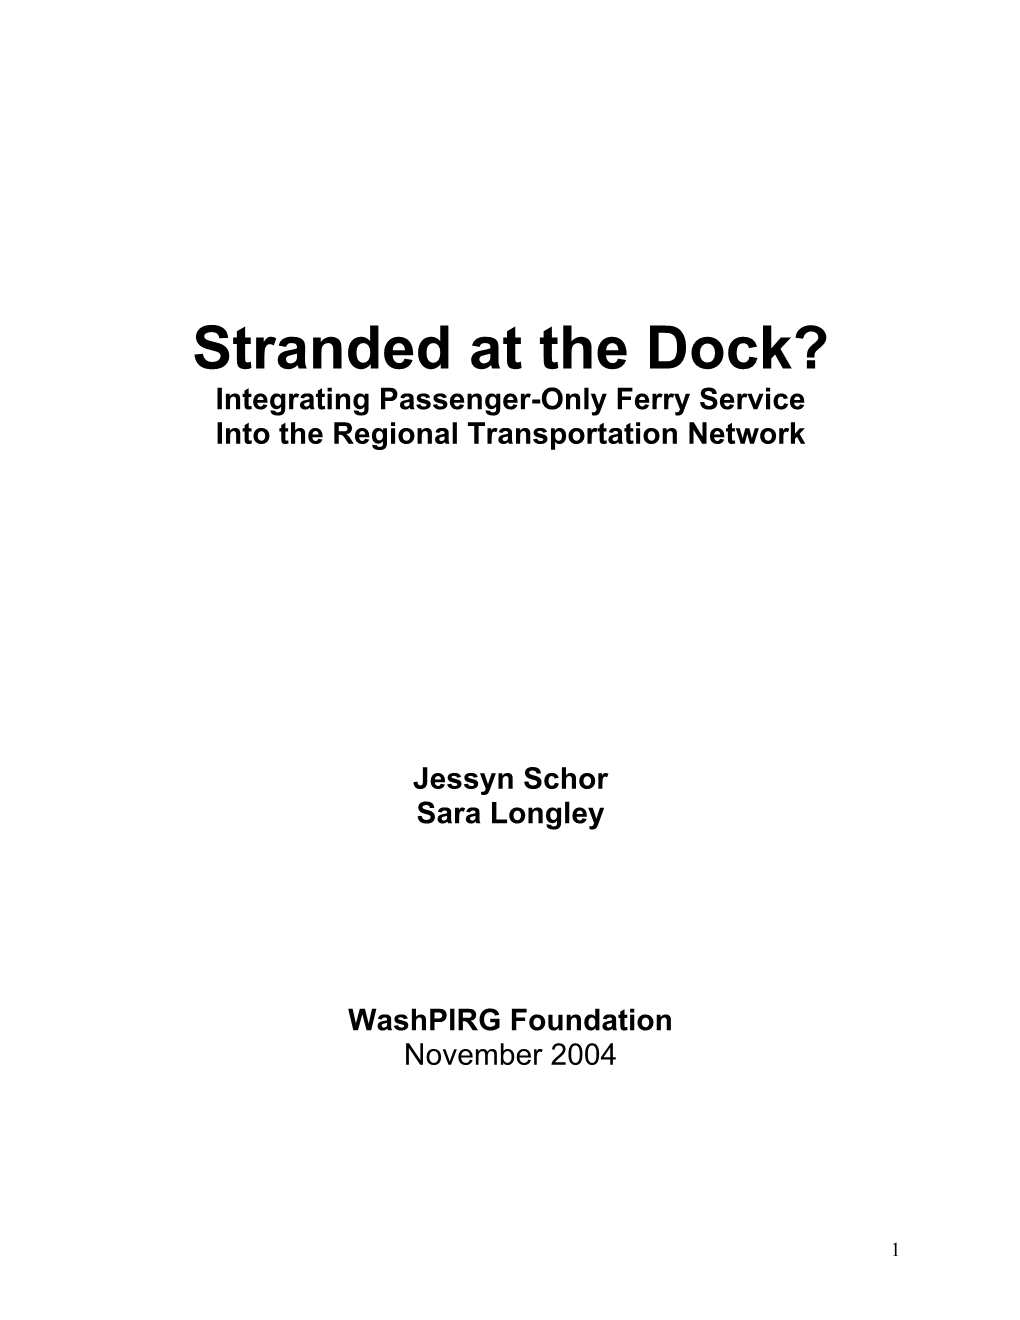 Stranded at the Dock? Integrating Passenger-Only Ferry Service Into the Regional Transportation Network